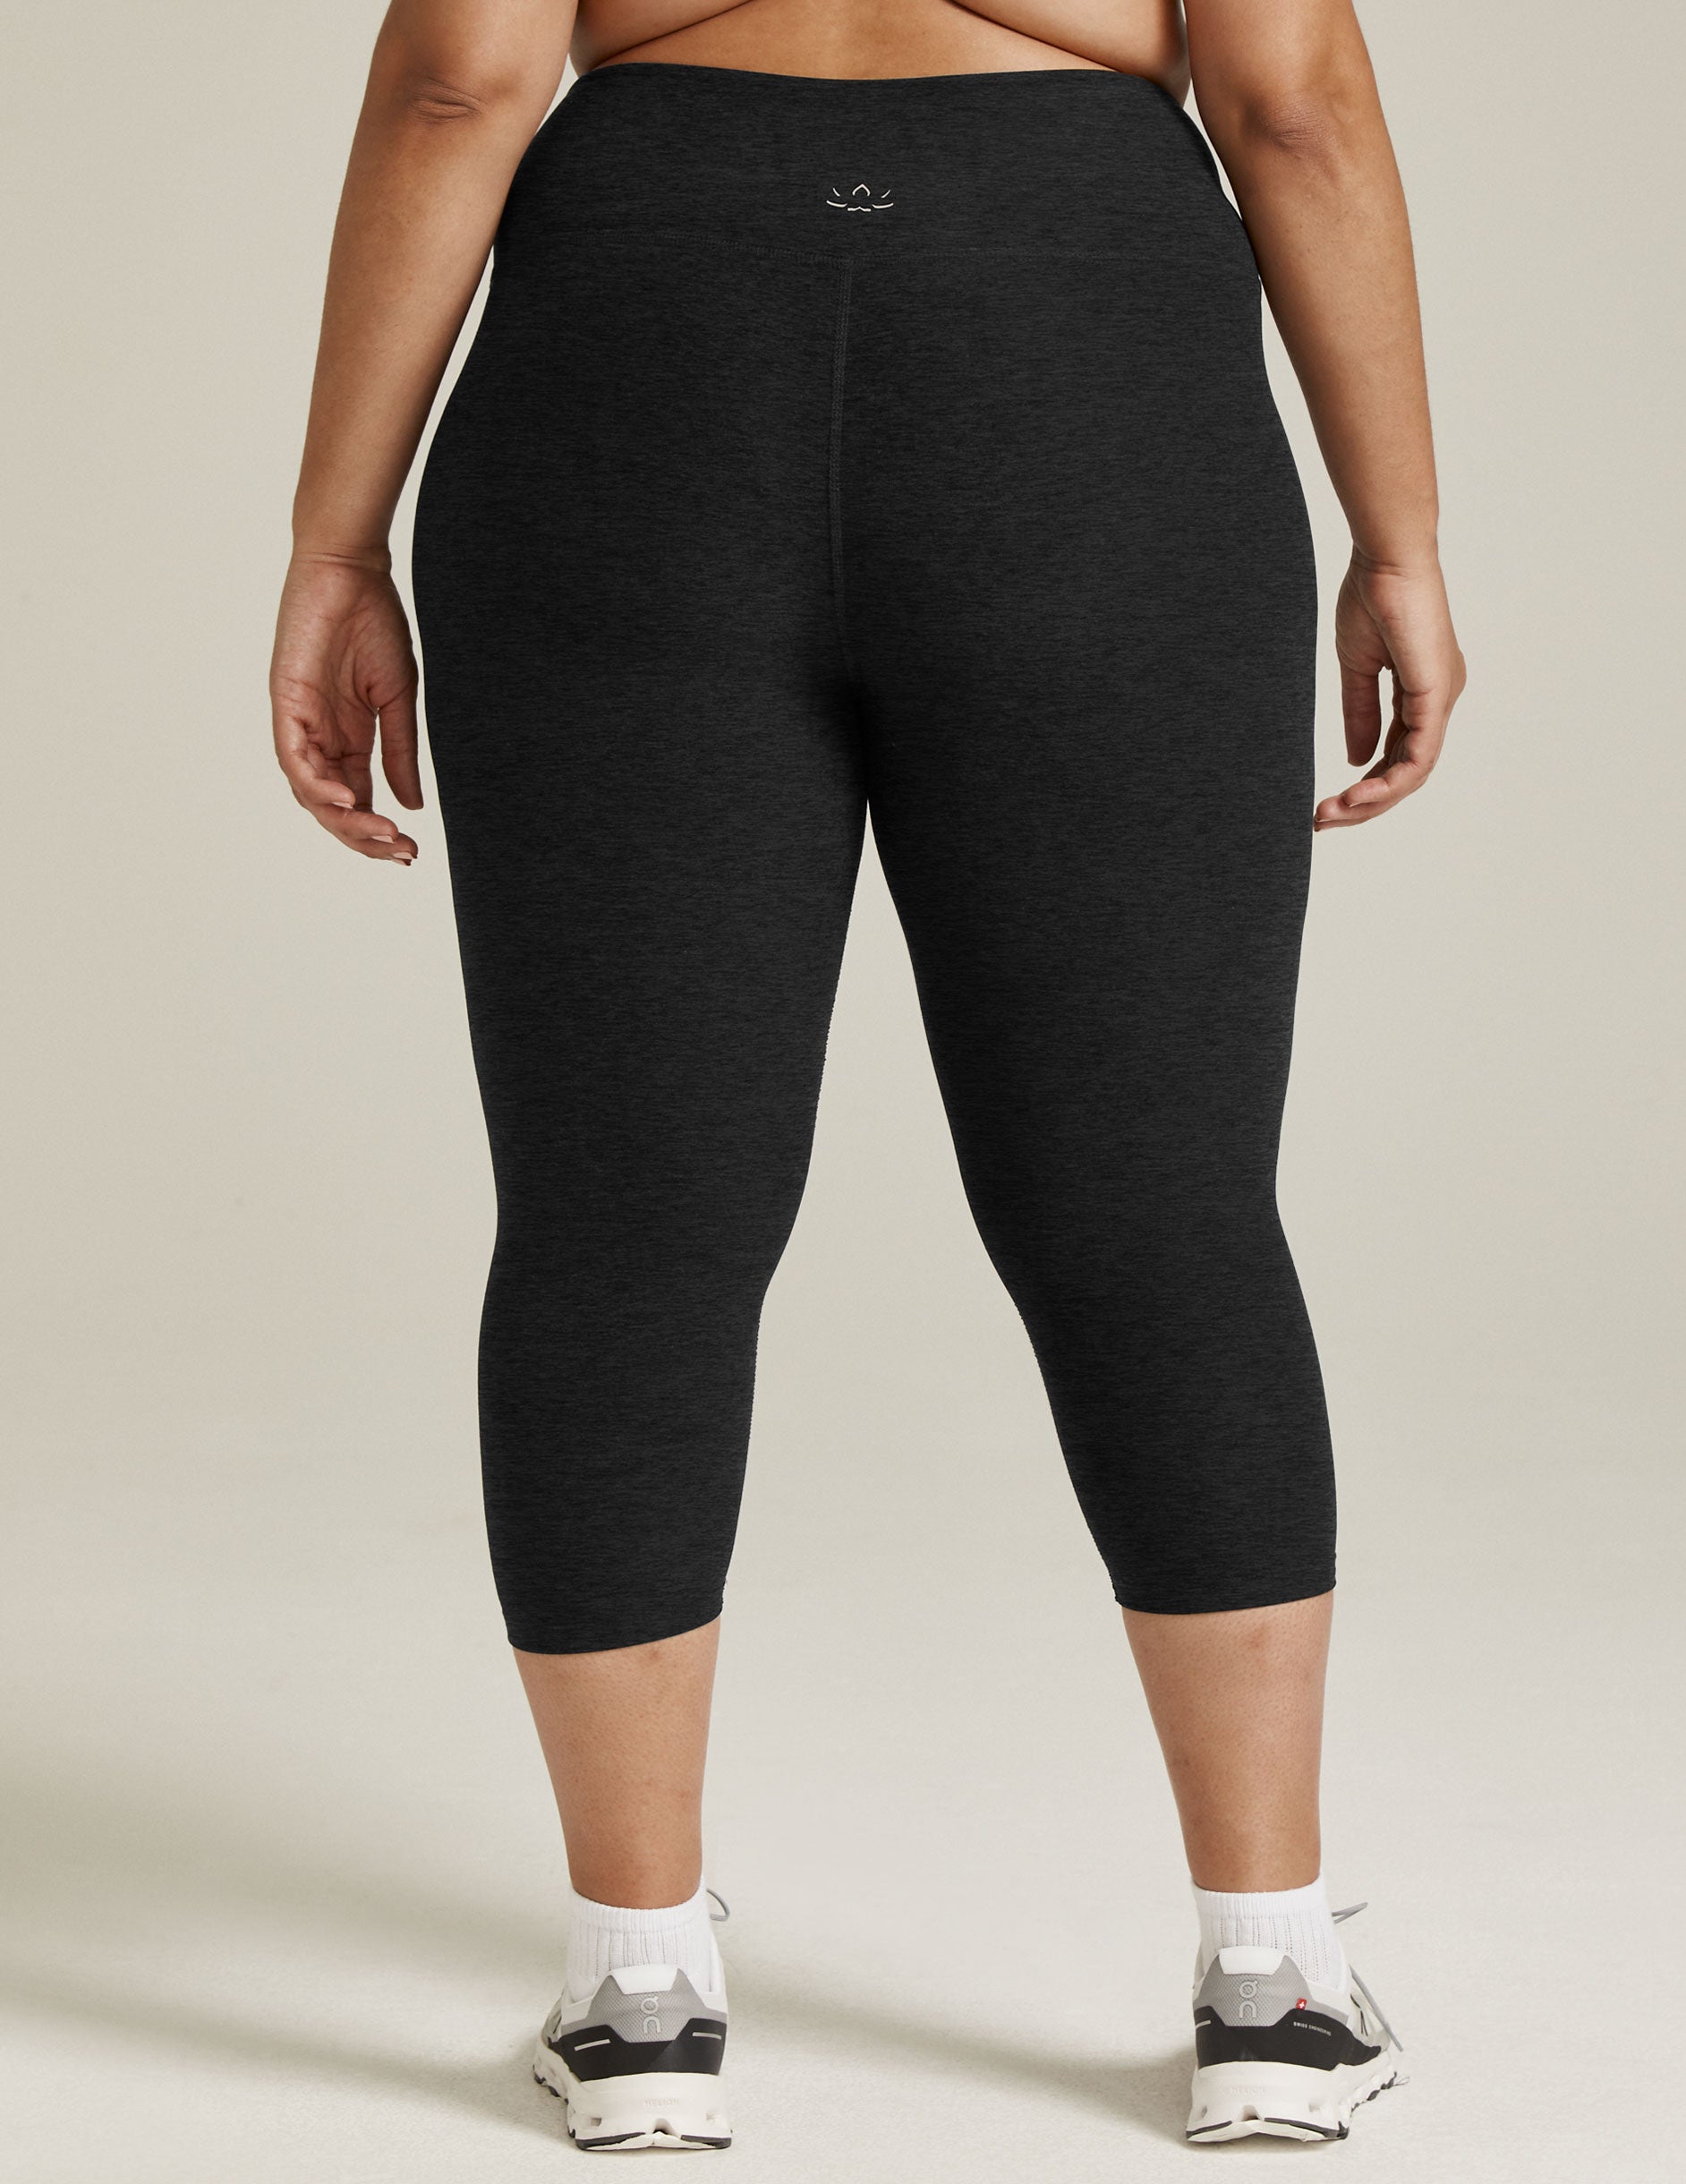 Beyond Yoga Spacedye Walk And Talk High Waisted Capri Legging in Navy &  Coral - $32 - From Mayra